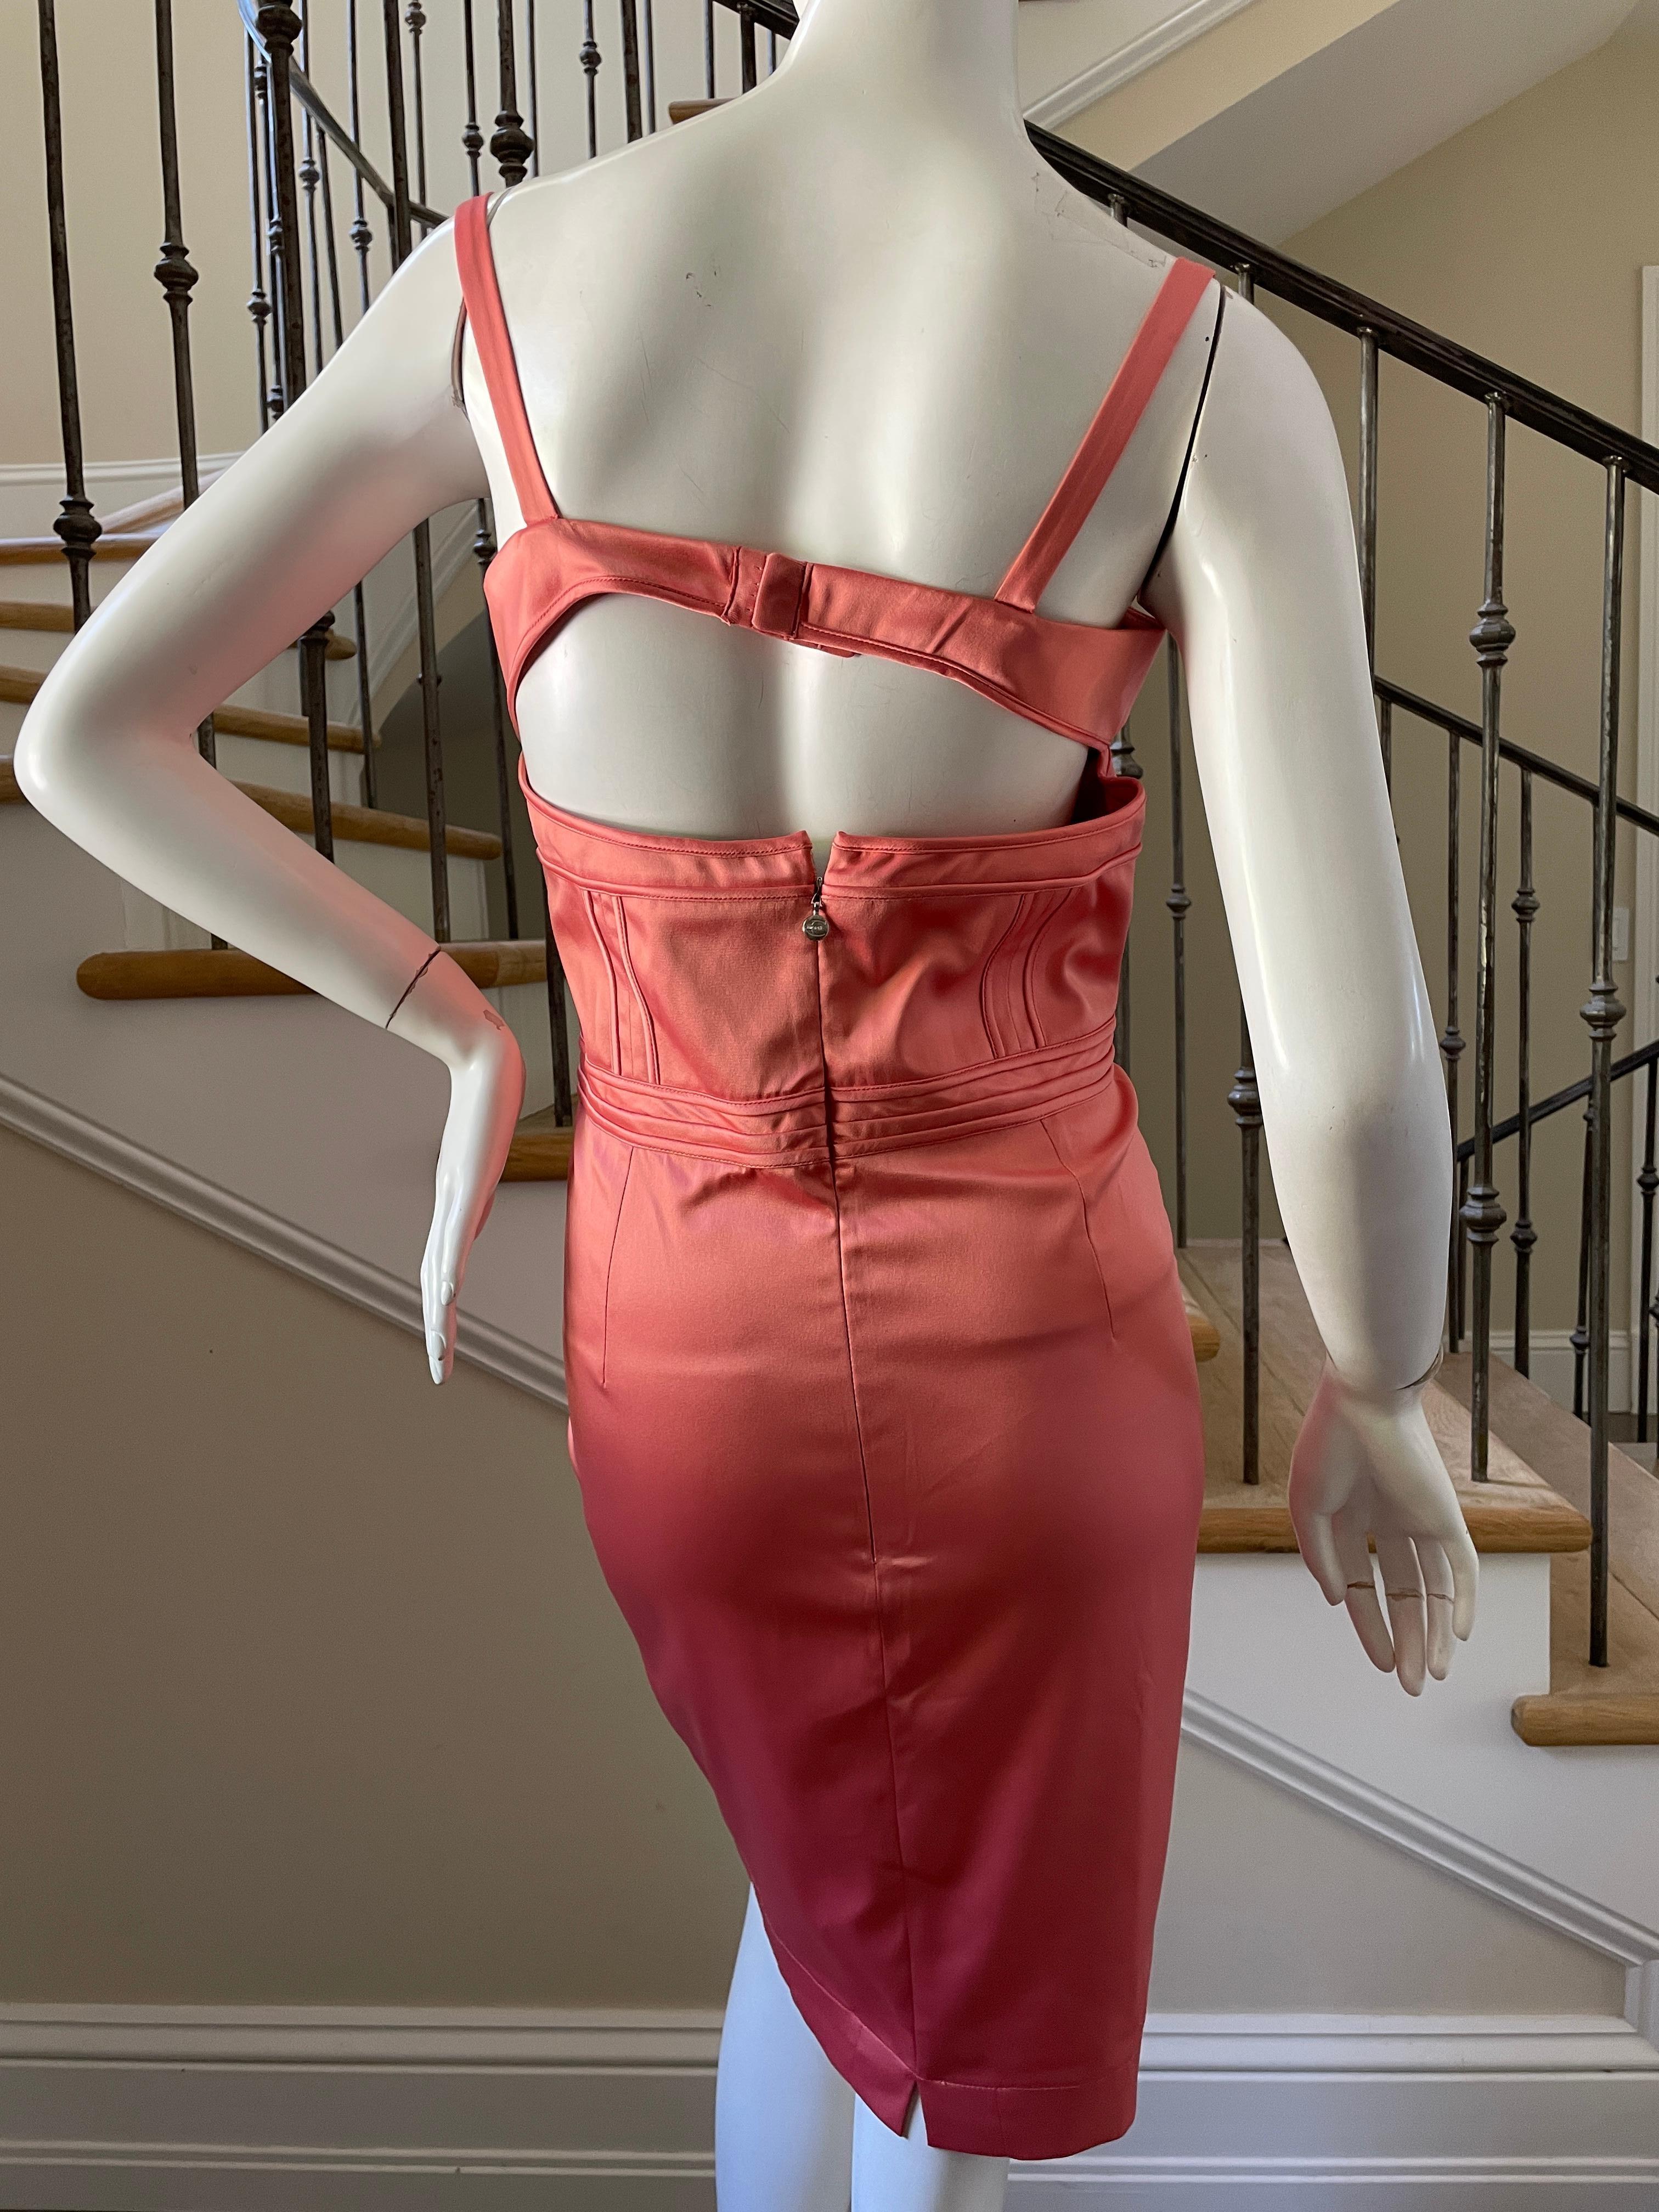 Just Cavalli Sexy Pink Corset Cocktail Dress by Roberto Cavalli For Sale 2